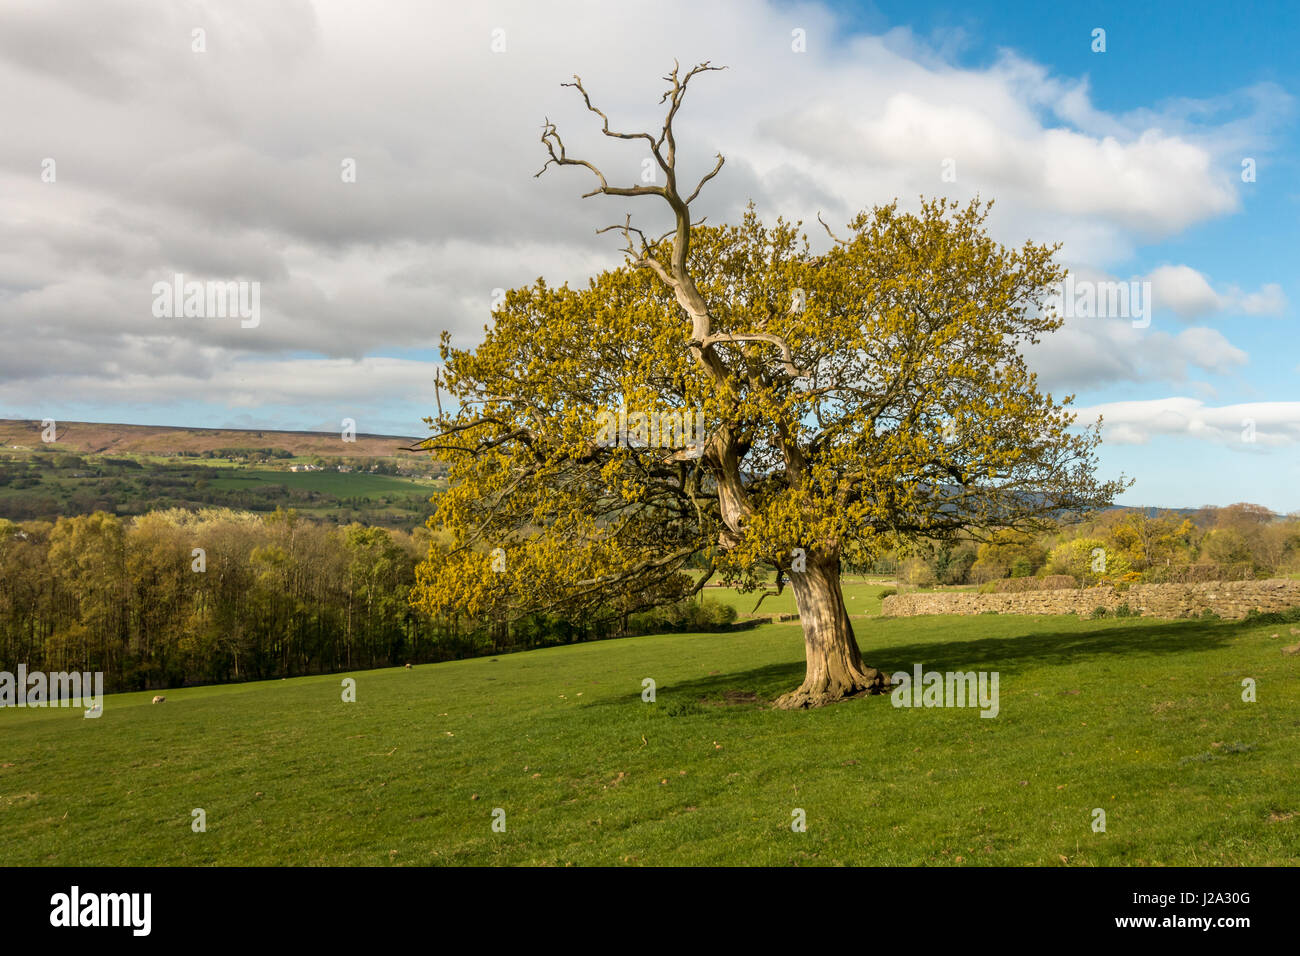 Dramatic old oak tree in spring sunshine, Askwith, West Yorkshire, UK Stock Photo